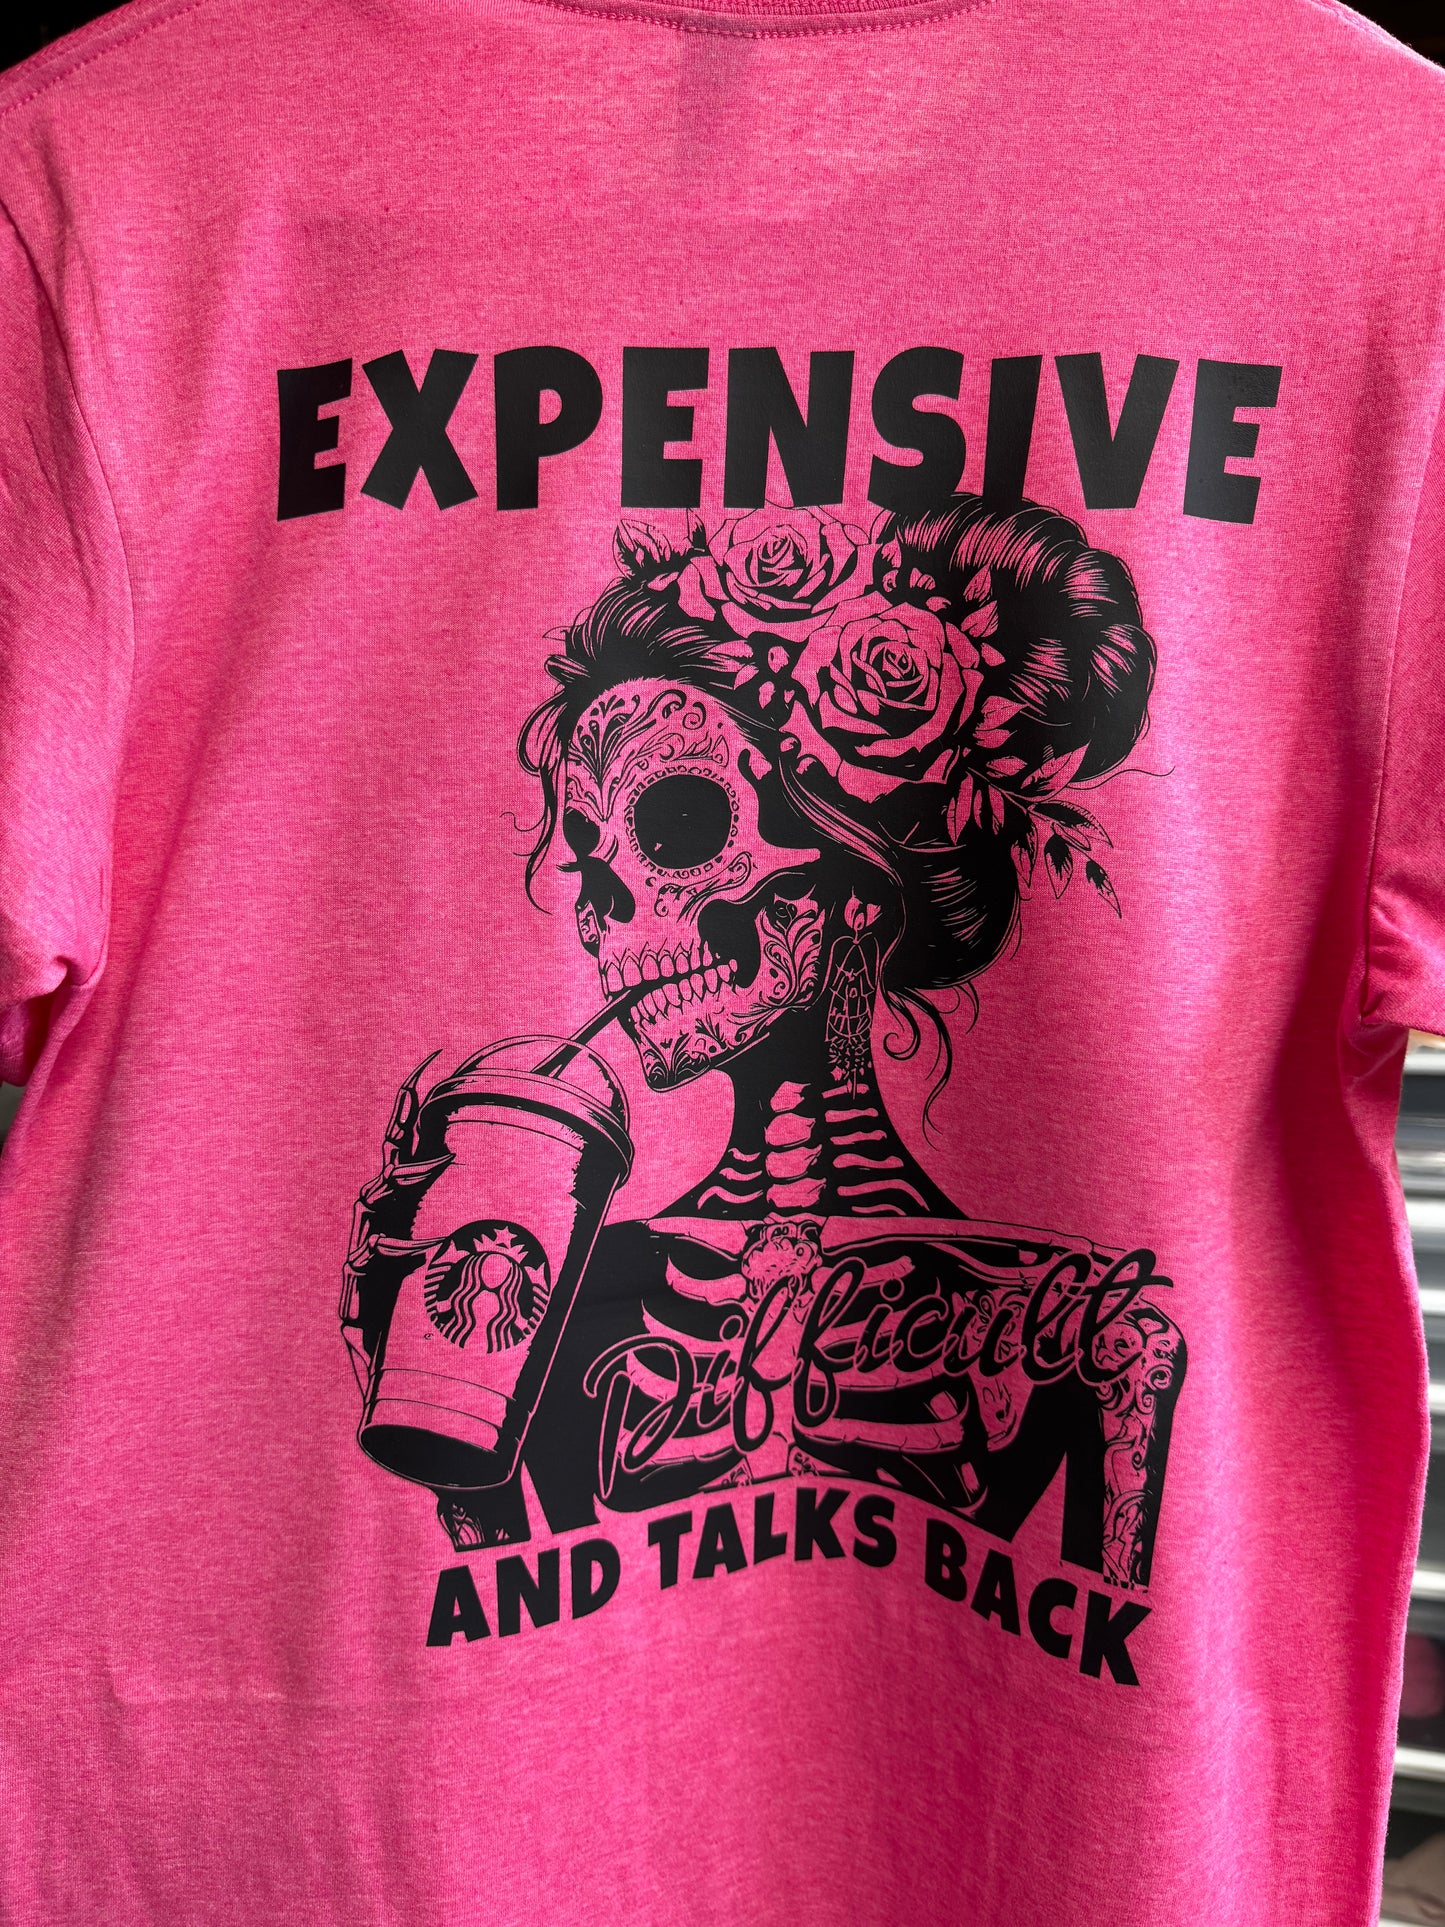 Expensive and Talks Back Doubled Sided Shirt